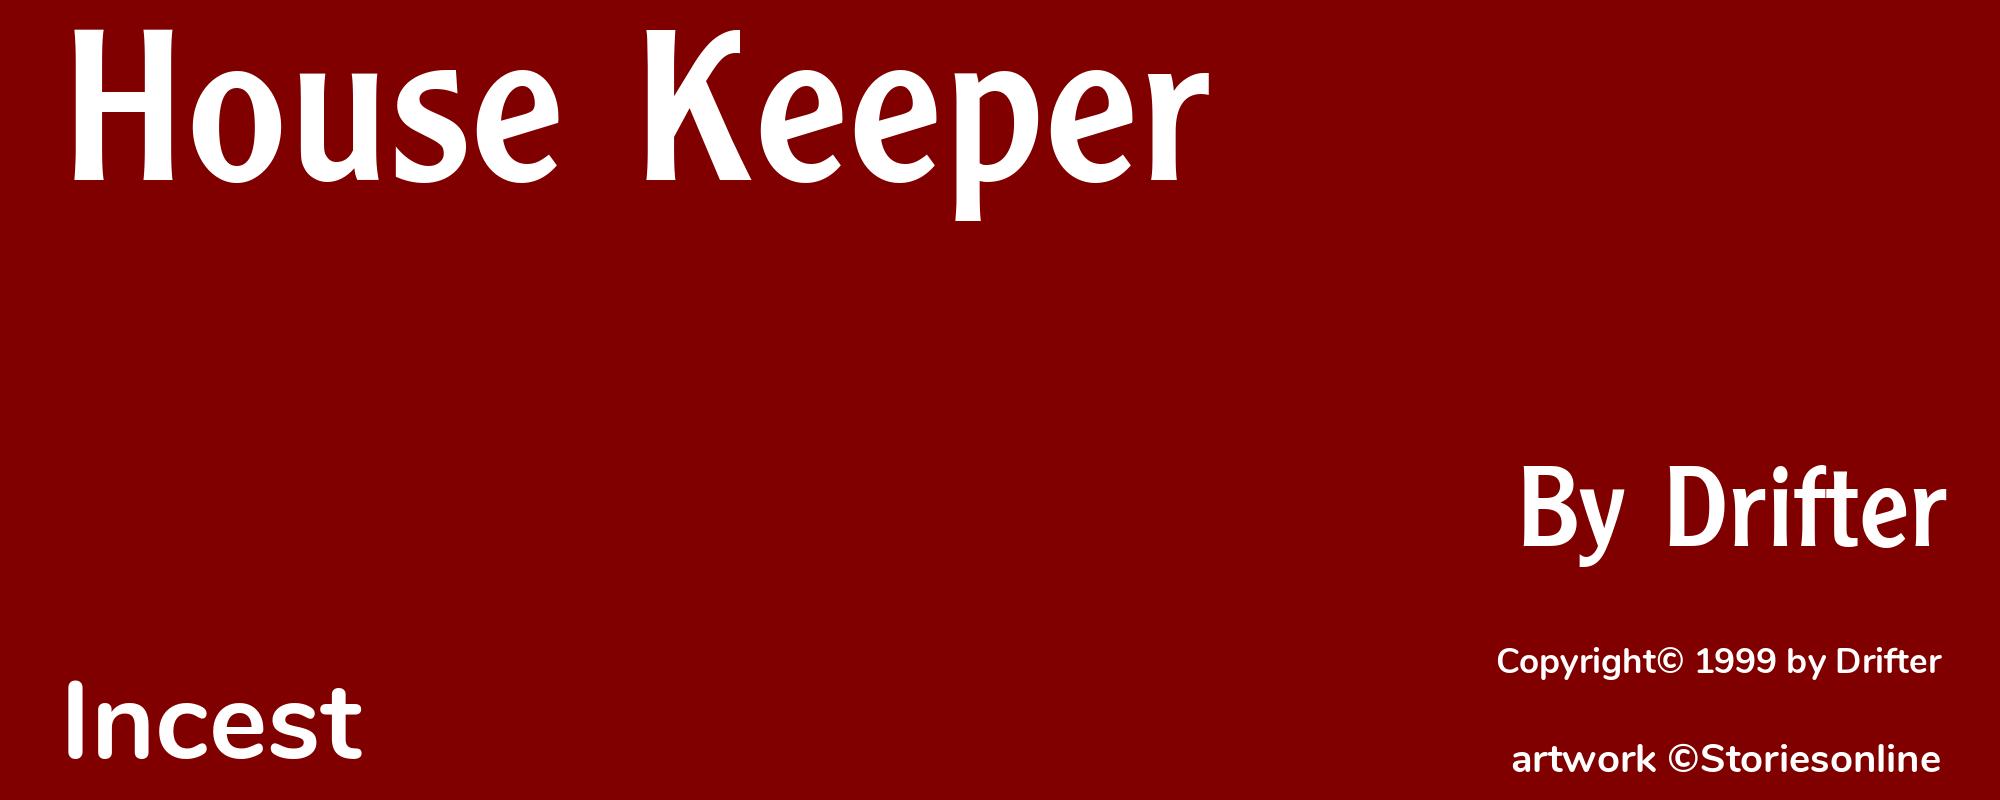 House Keeper - Cover